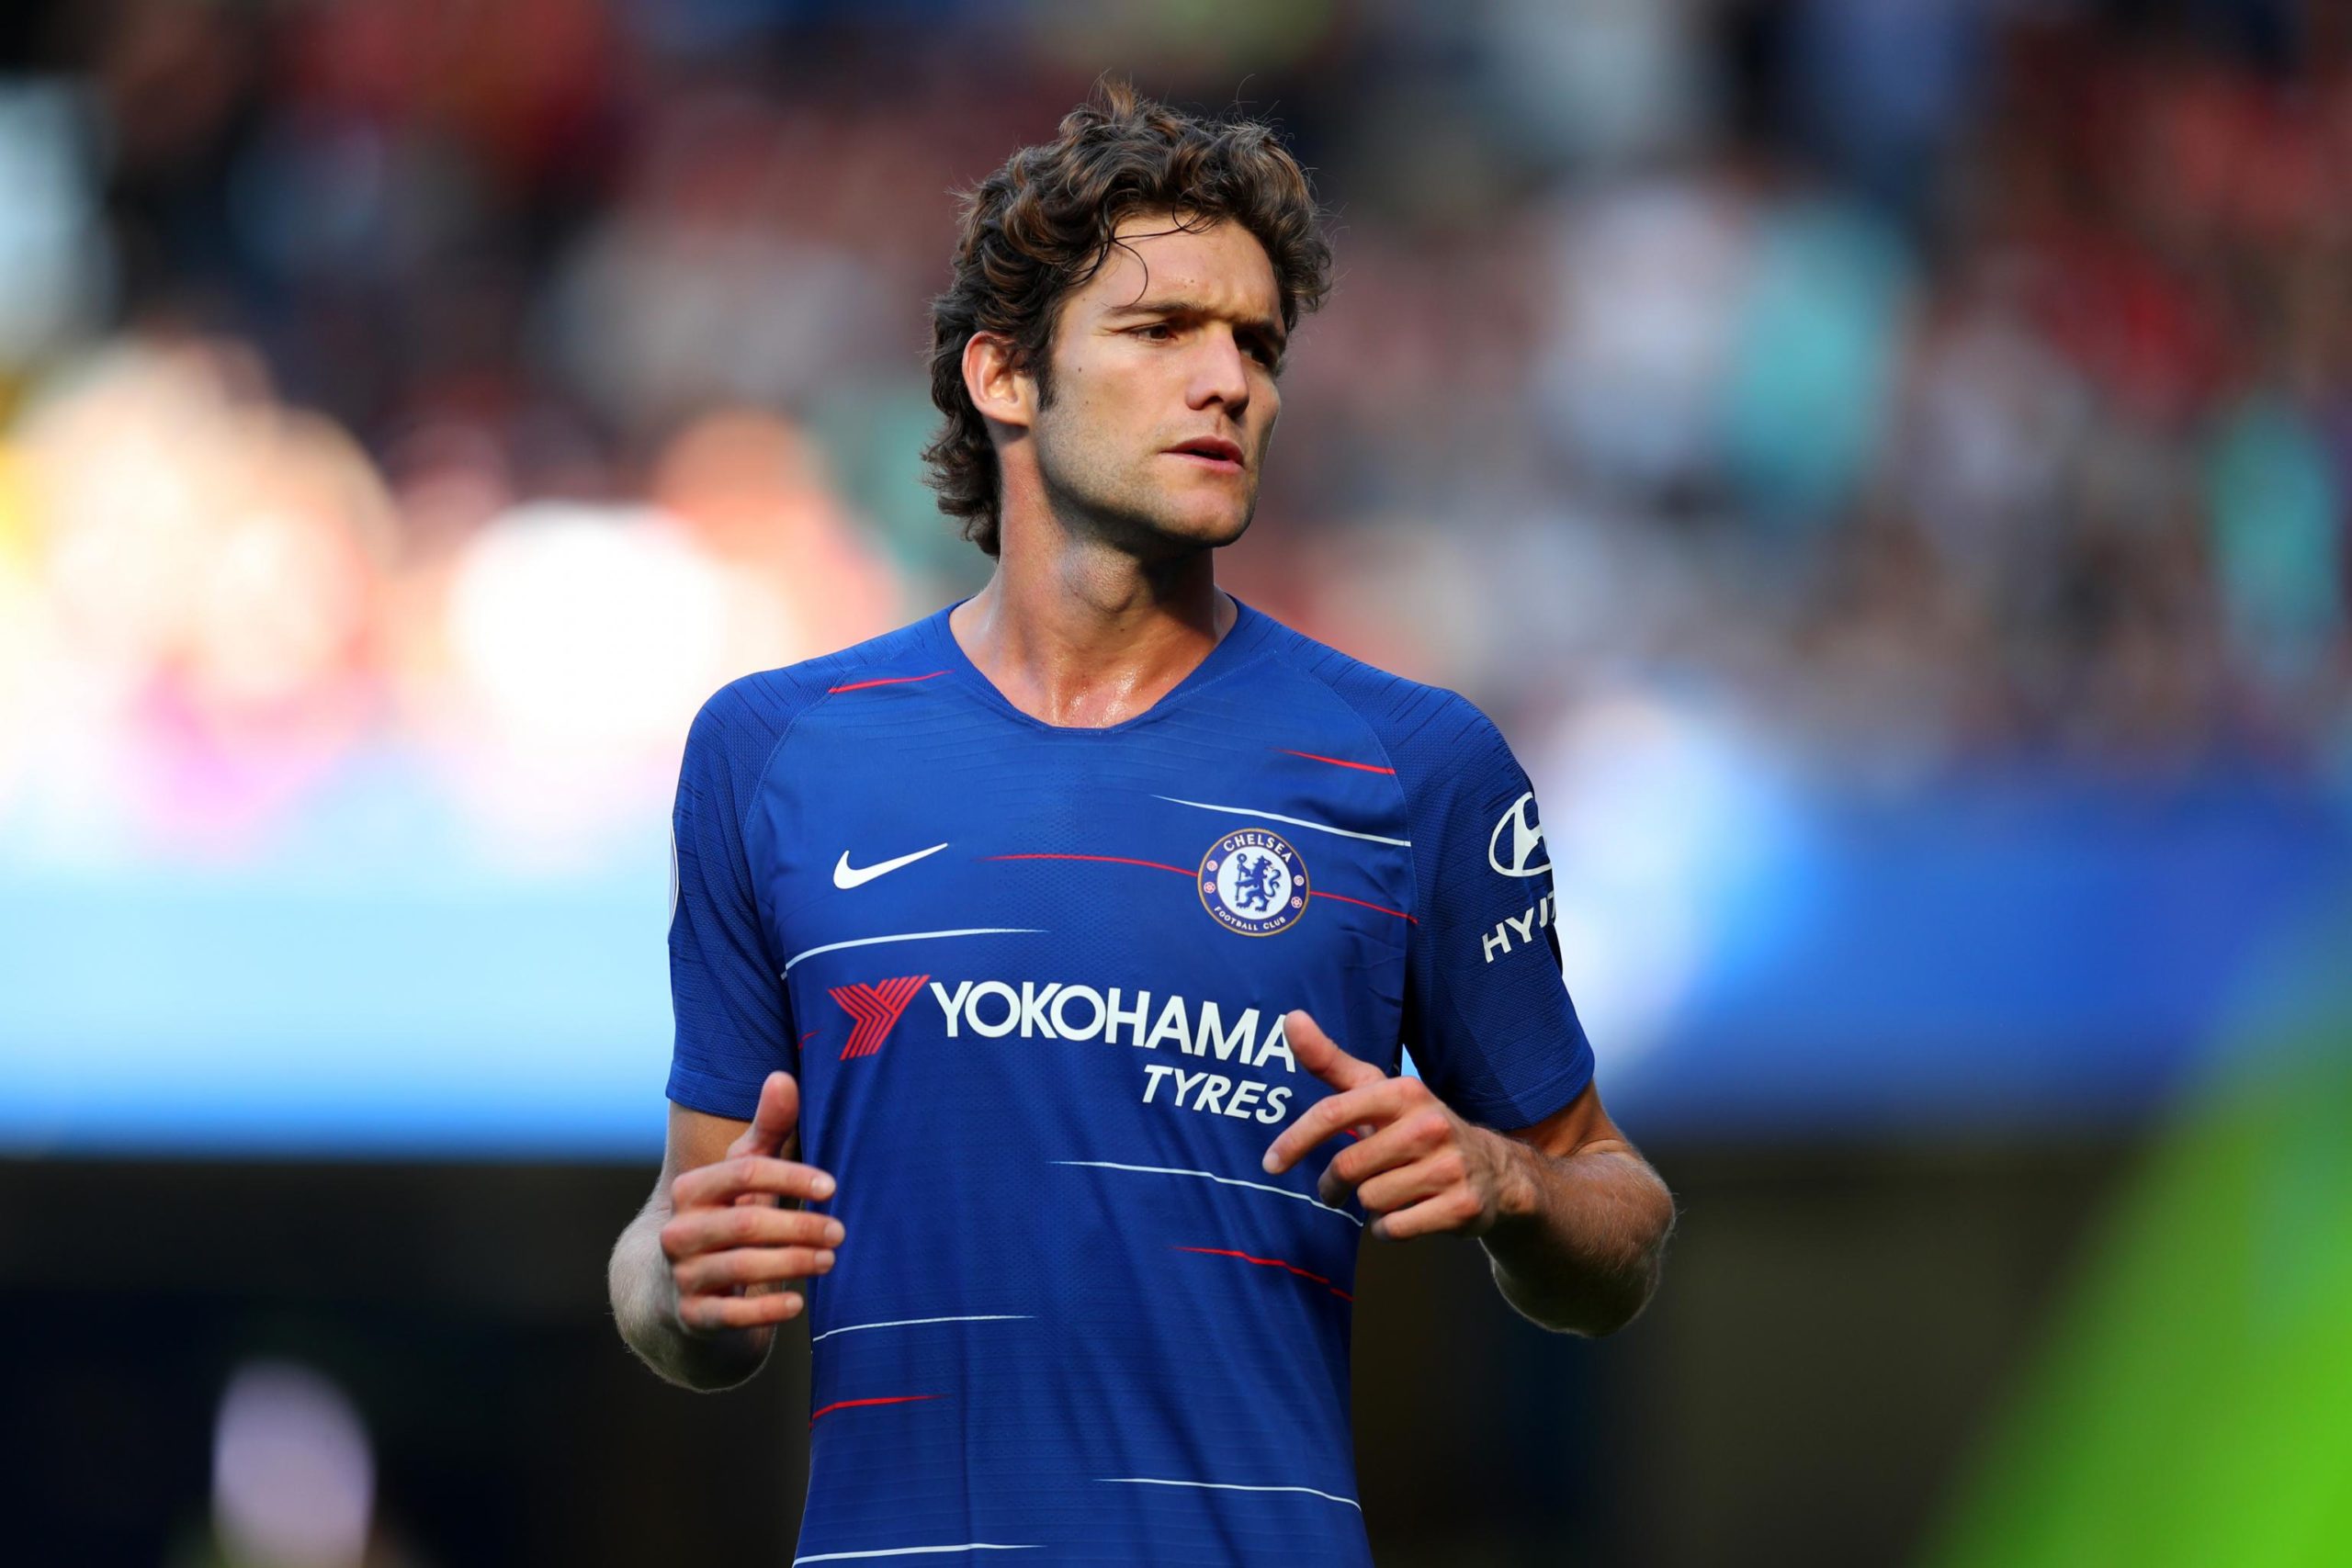 Chelsea's Marcos Alonso seems to be Antonio Conte's latest Premier League infatuation. Will the Inter boss manage to bring him to Serie A in this transfer market session?